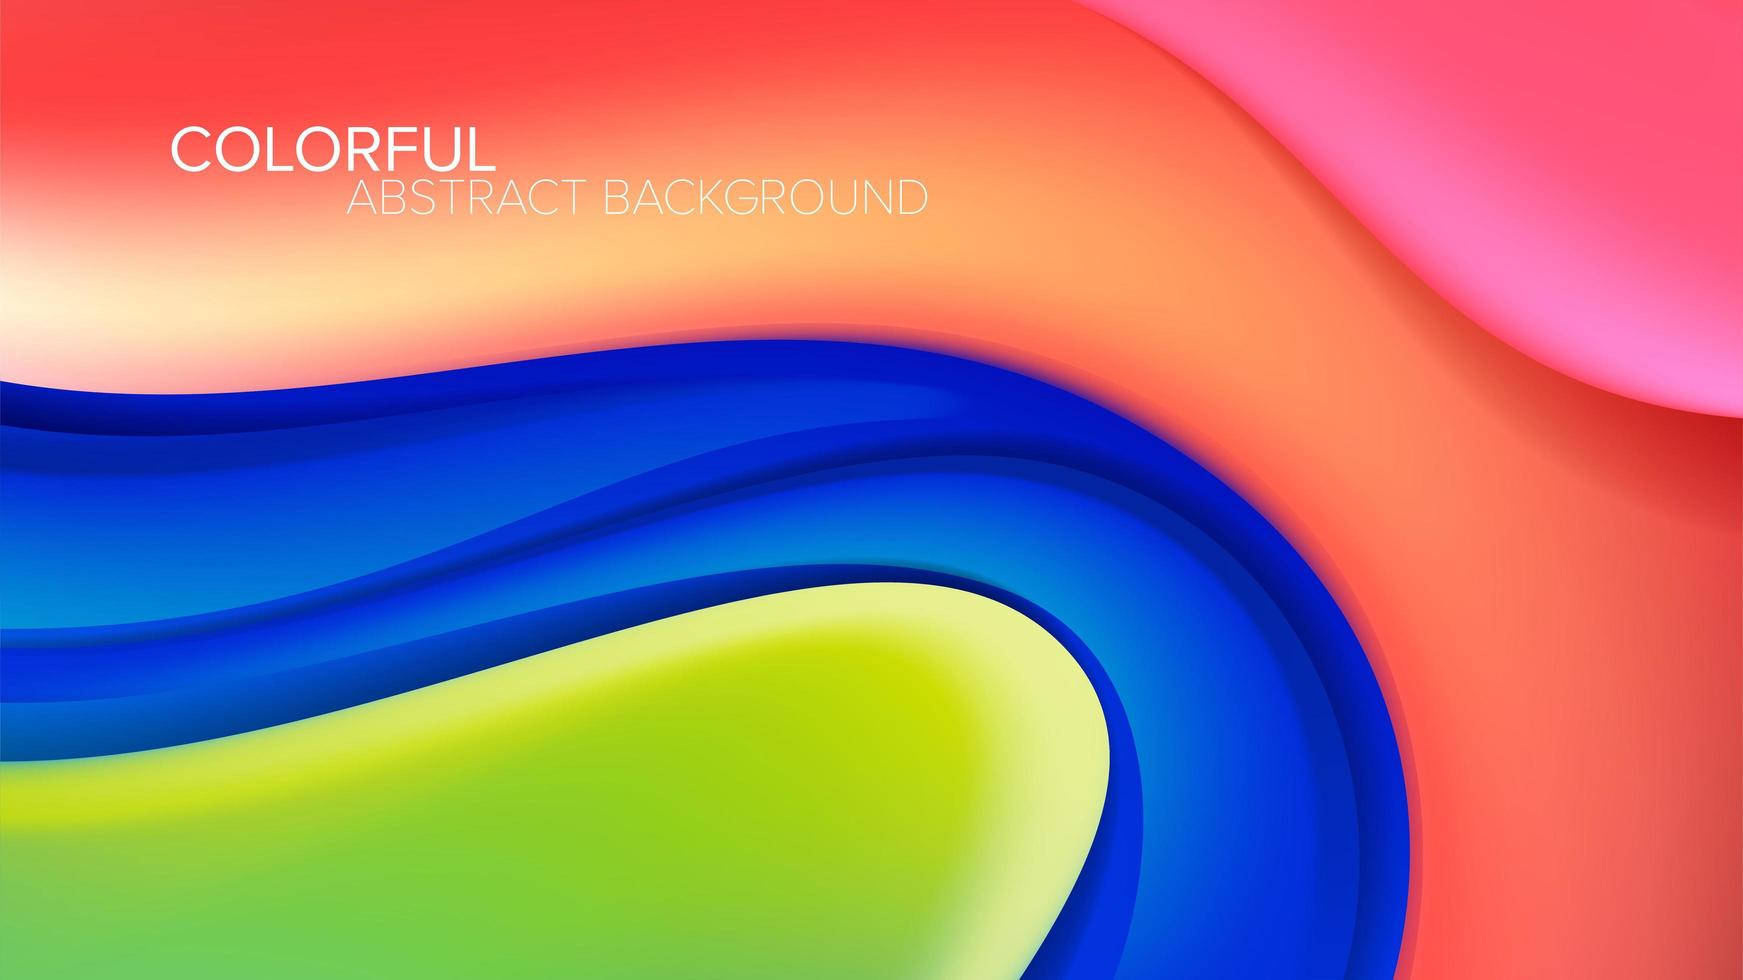 Colorful Distorted Curved Shape Background vector